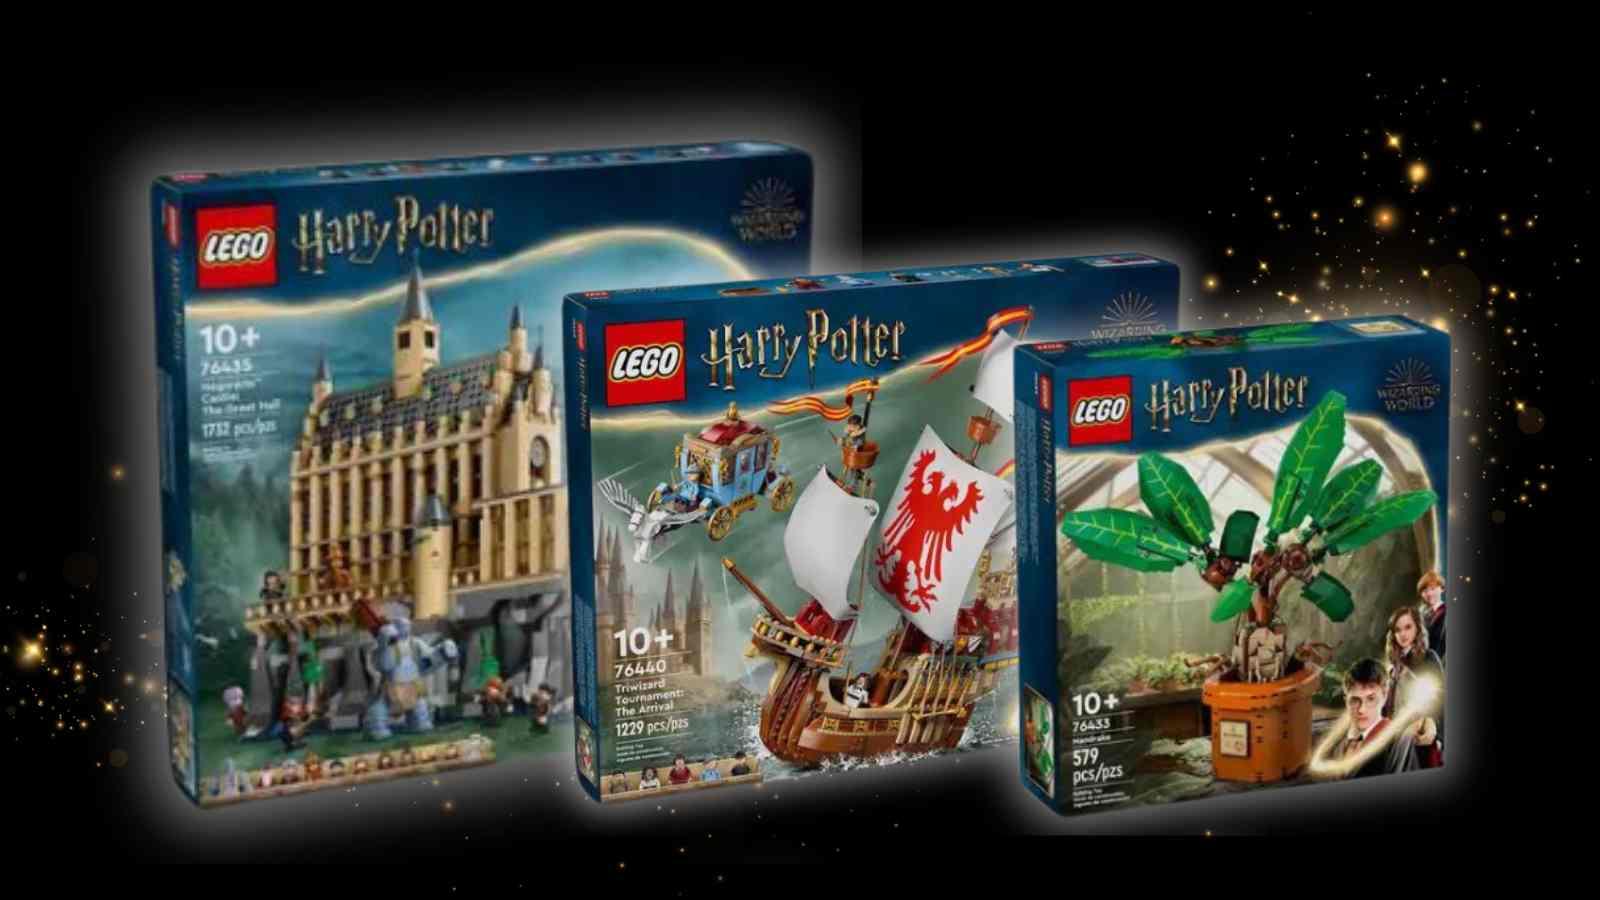 Three of the new LEGO Harry Potter sets